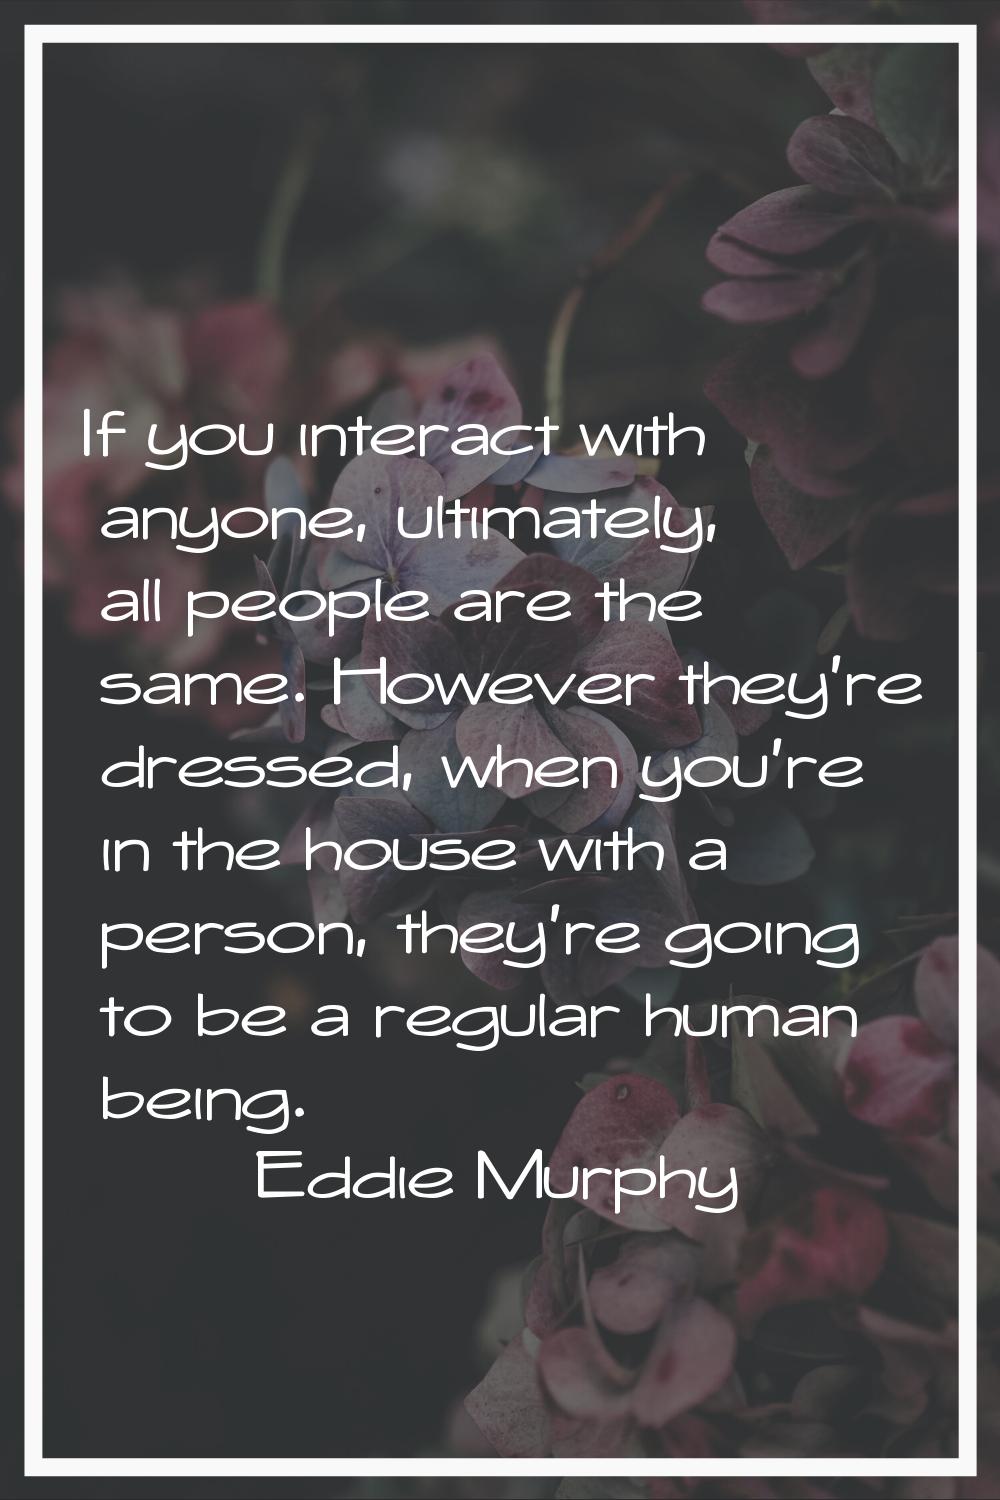 If you interact with anyone, ultimately, all people are the same. However they're dressed, when you